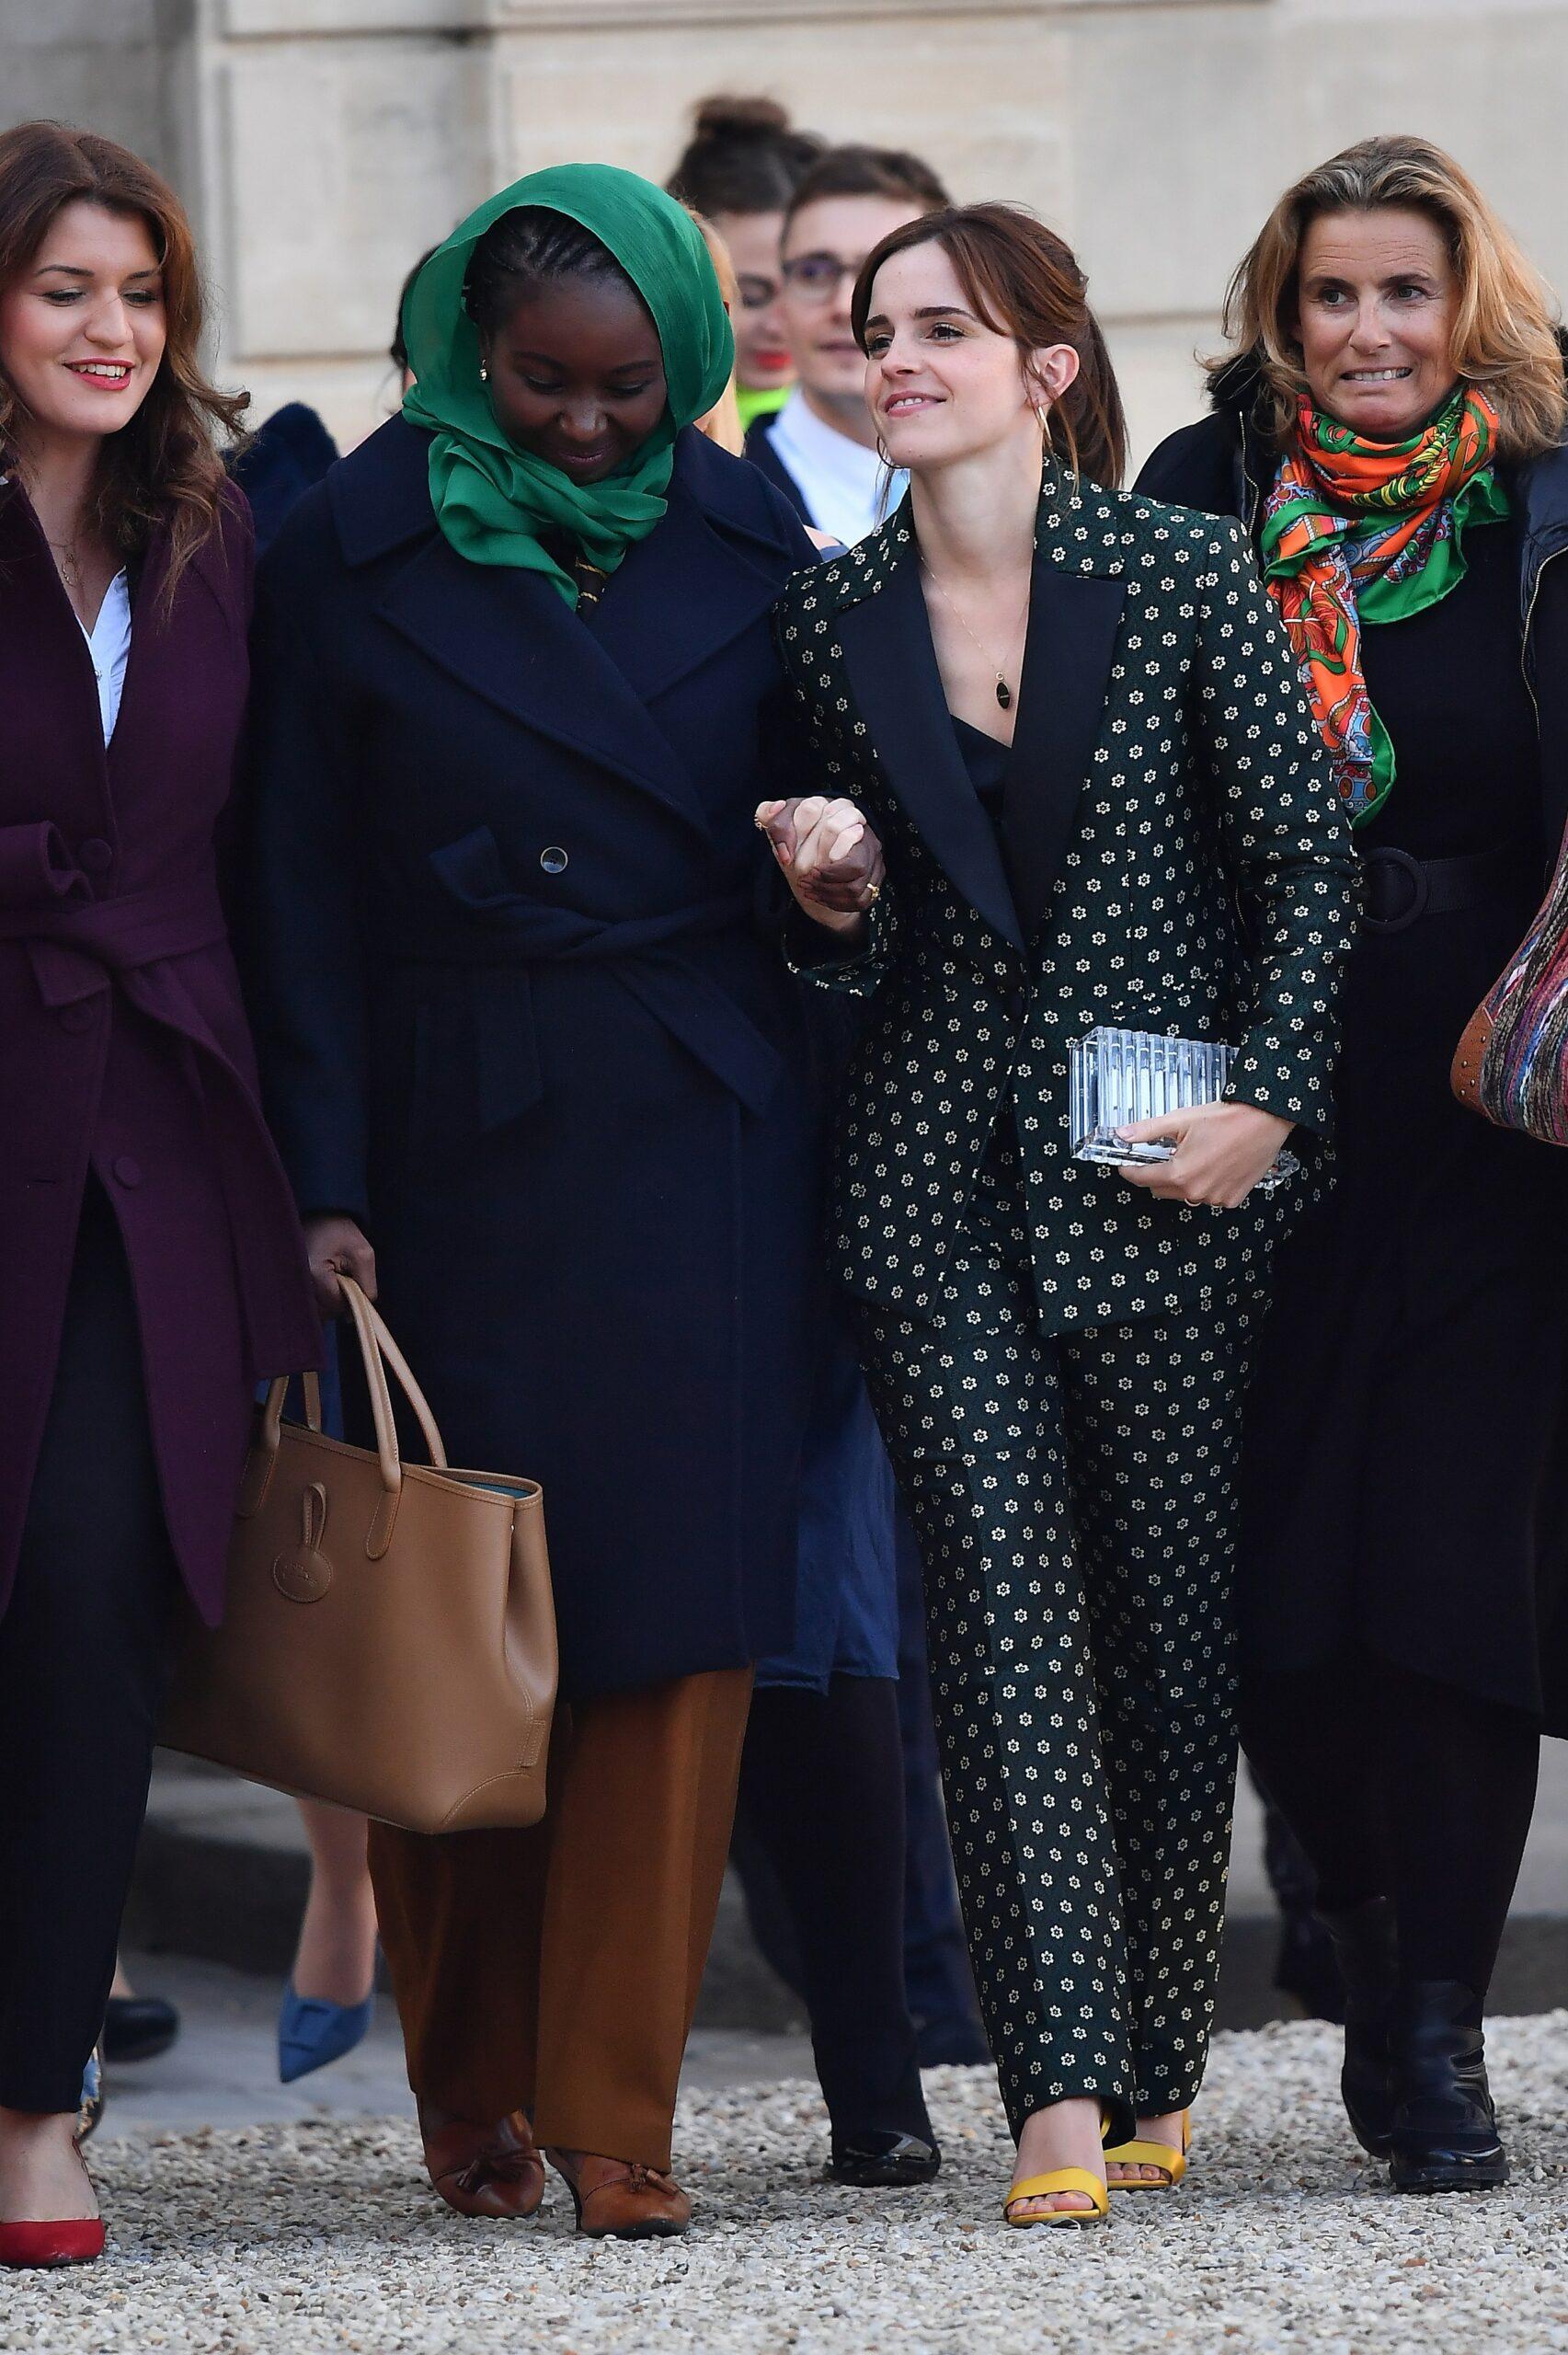 Emma Watson arrives at the Elysee Palace to attend the first meeting of the Gender Equality Avisory Council G7 Biarritz in Paris France on February 19 2019